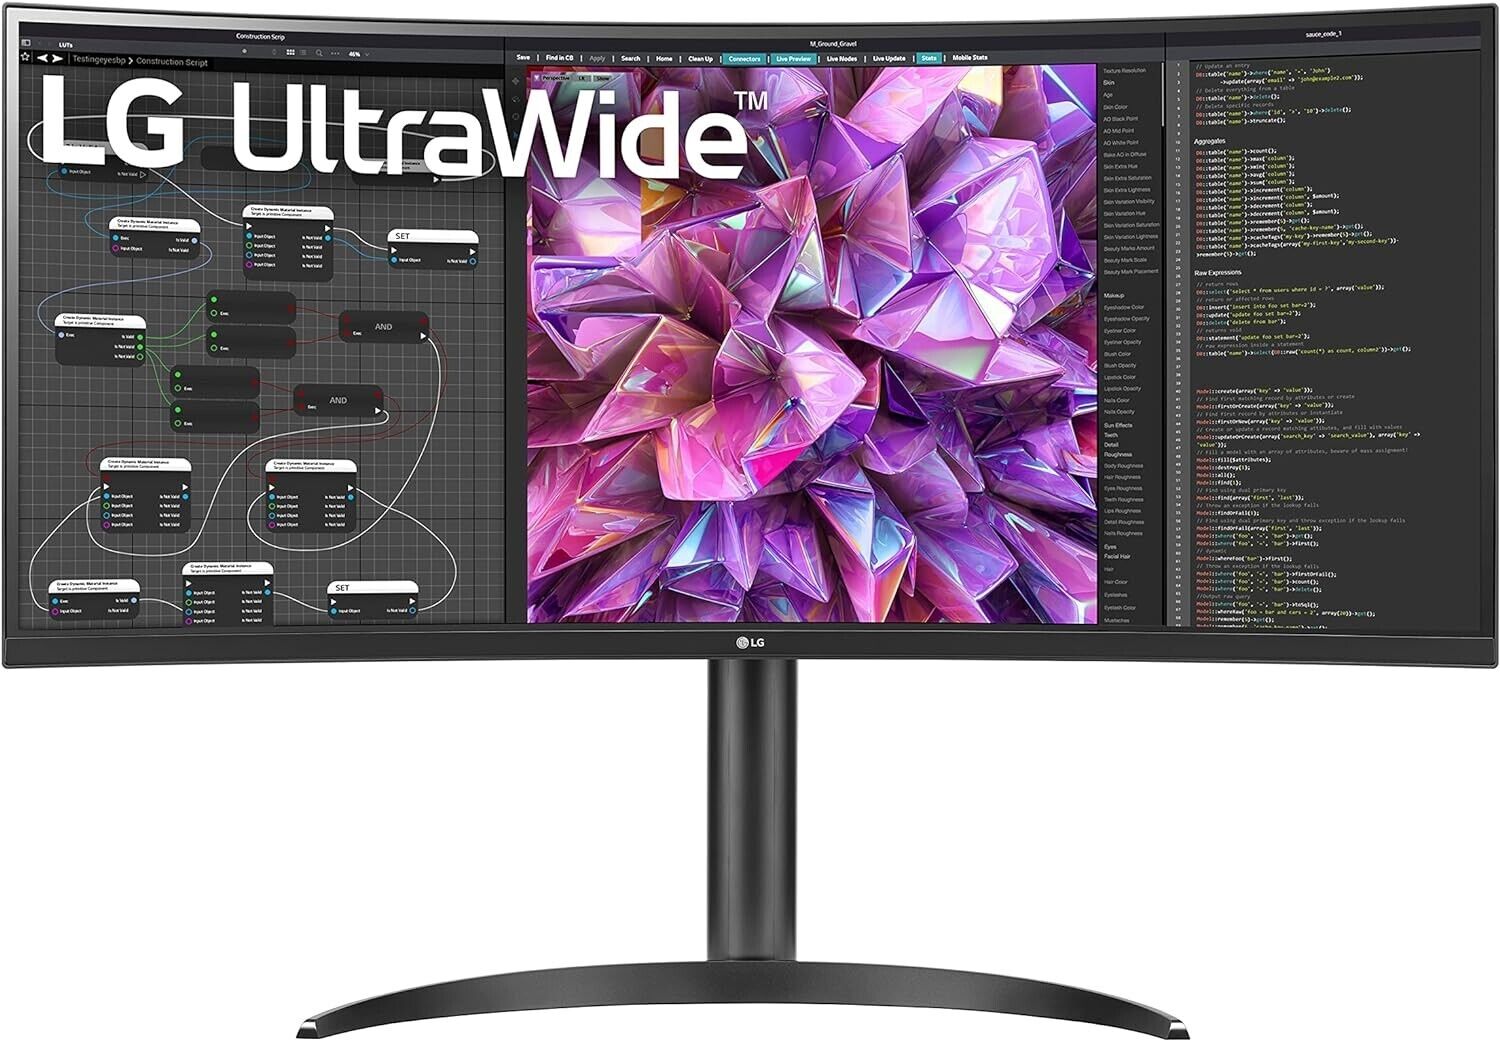 LG UltraWide QHD 34-Inch Curved Computer Monitor 34WQ73A-B, IPS with HDR.